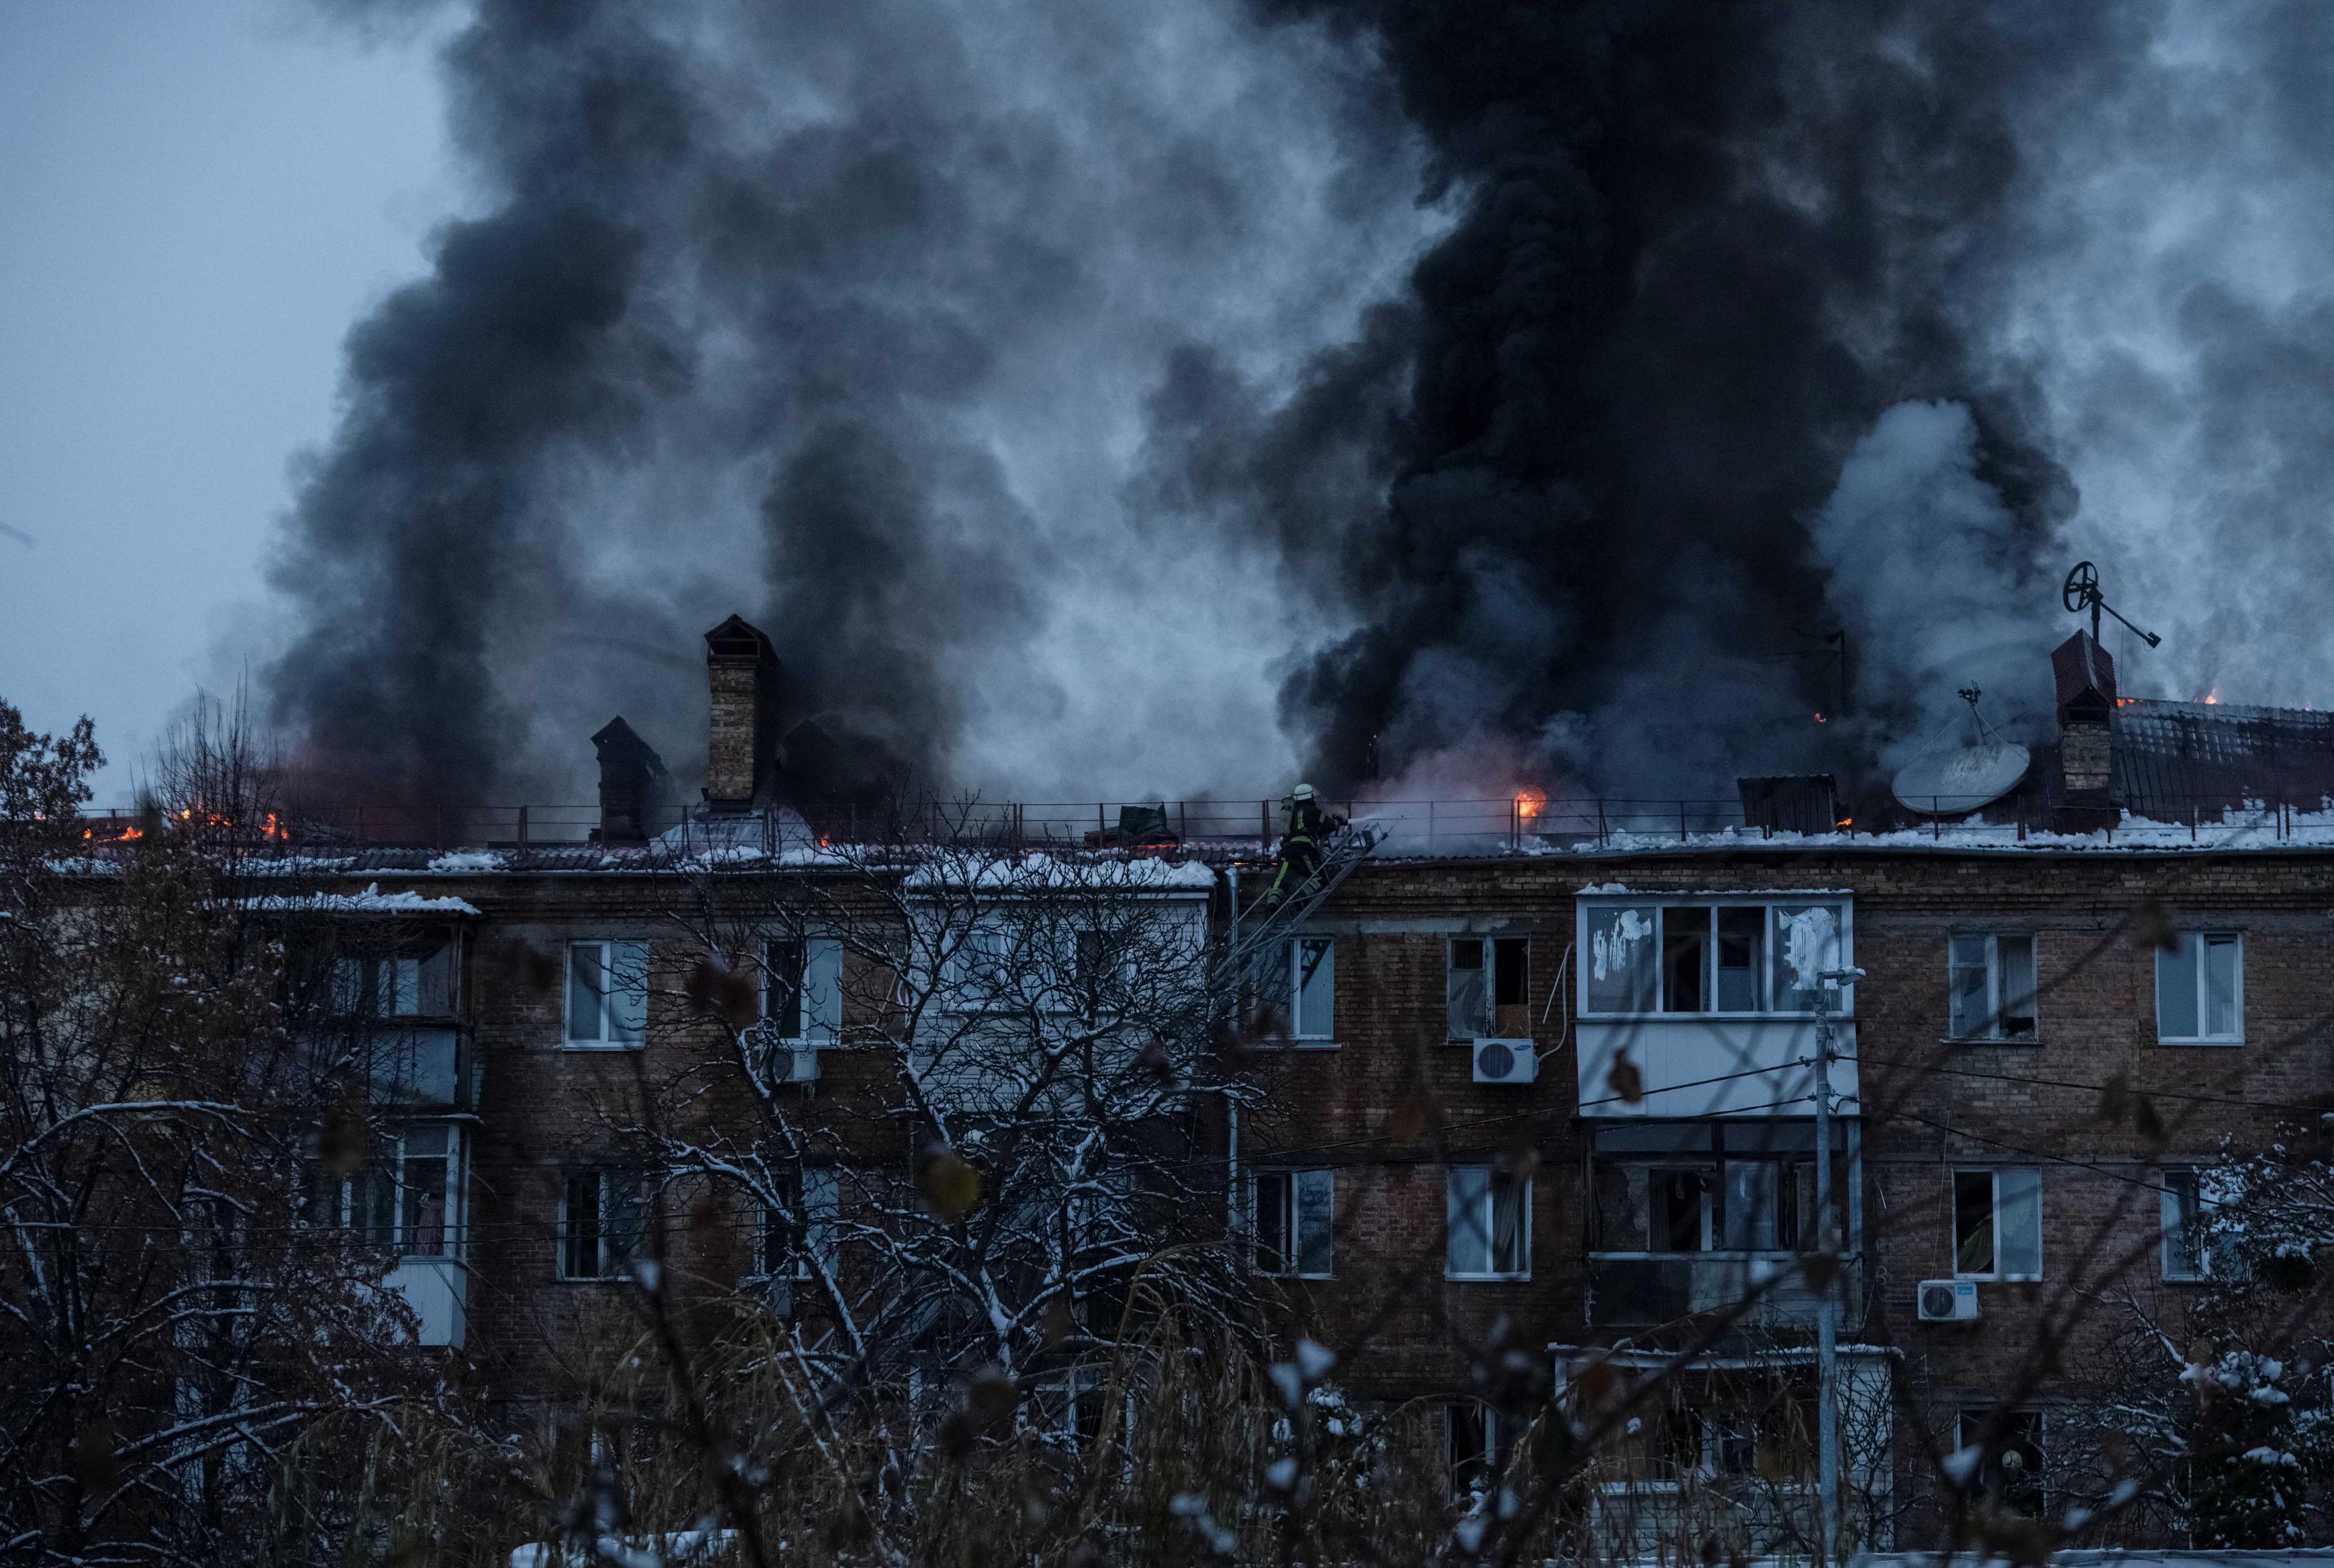 Rescuers work at a site of a residential building destroyed by a Russian missile attack, as Russia's attack on Ukraine continues, in the town of Vyshhorod, near Kyiv, Ukraine, Nov 23. Photo: Reuters